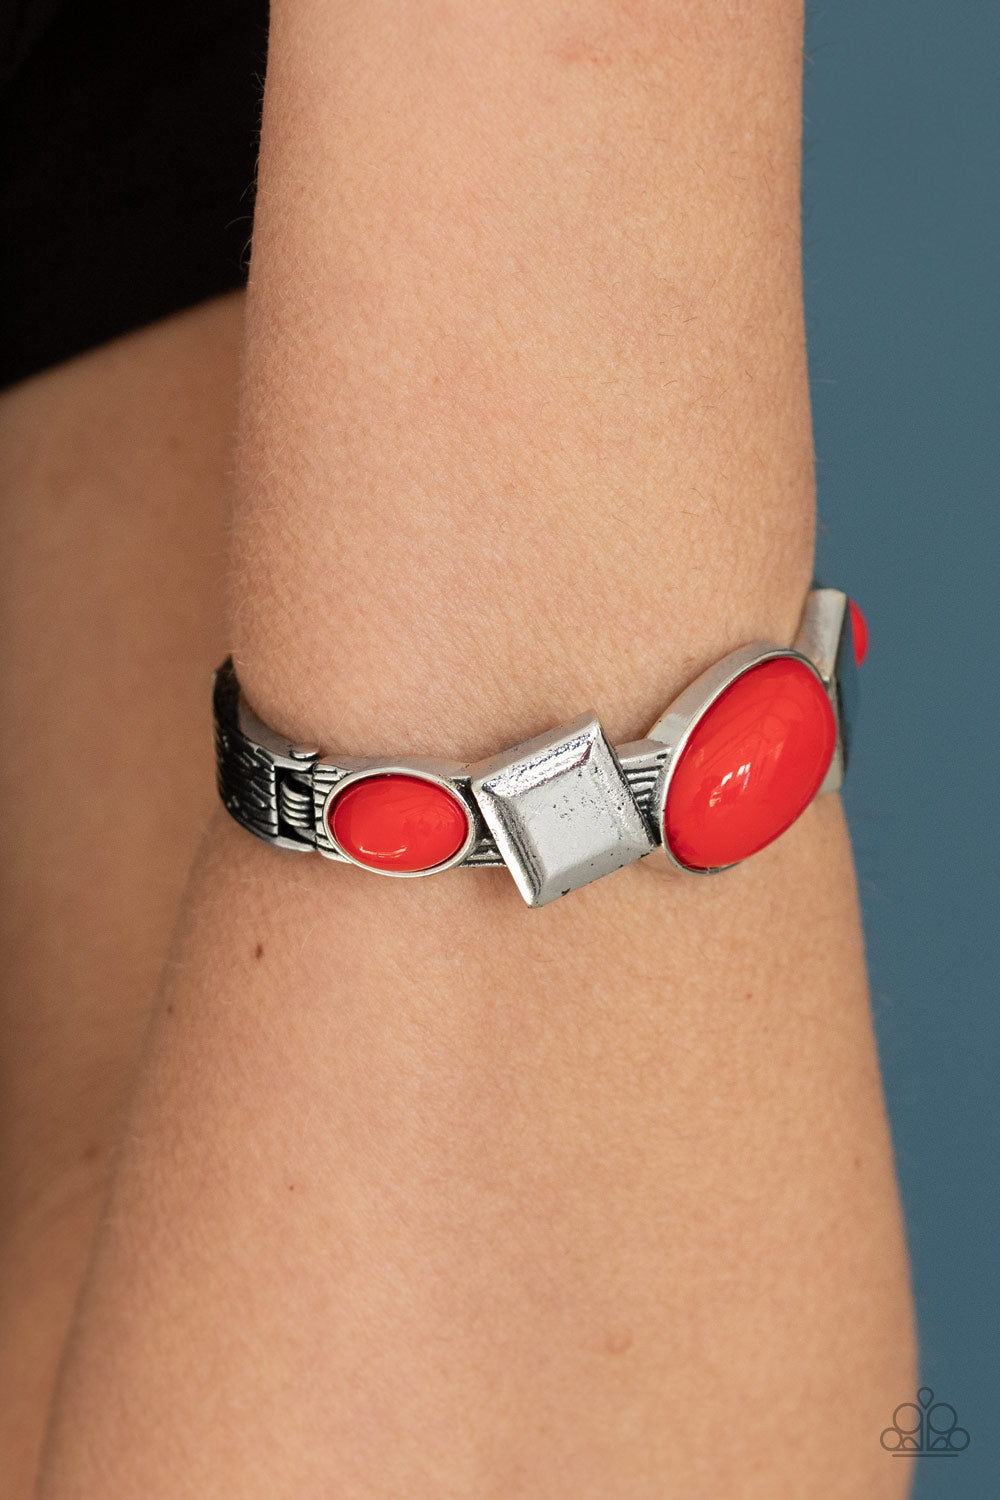 Paparazzi Bracelet ~ Abstract Appeal - Red